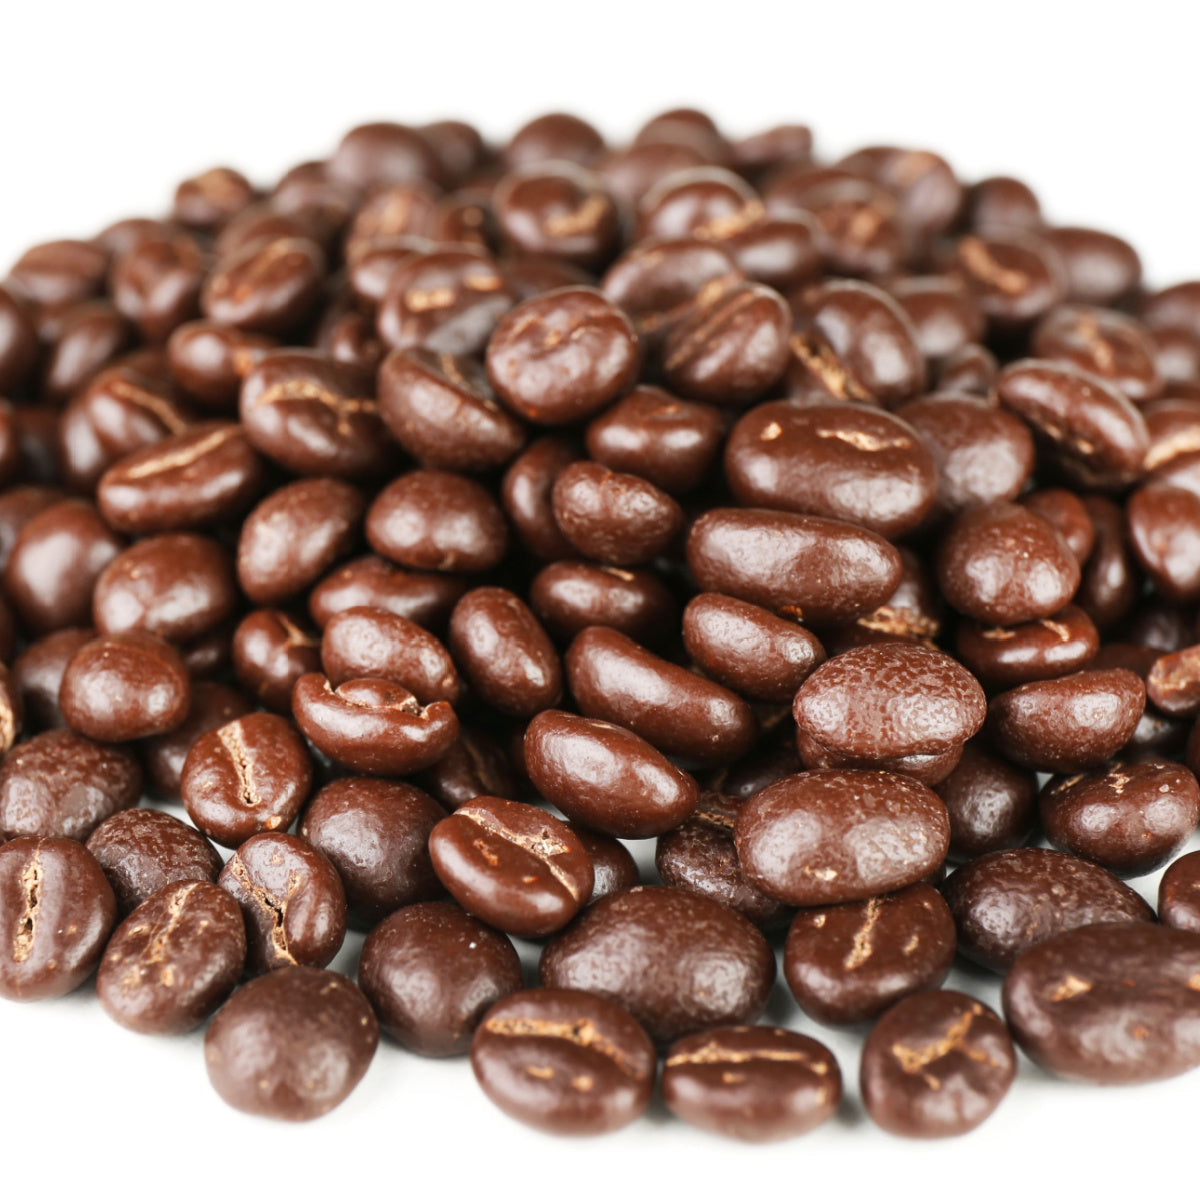 How to Make Chocolate-Covered Coffee Beans